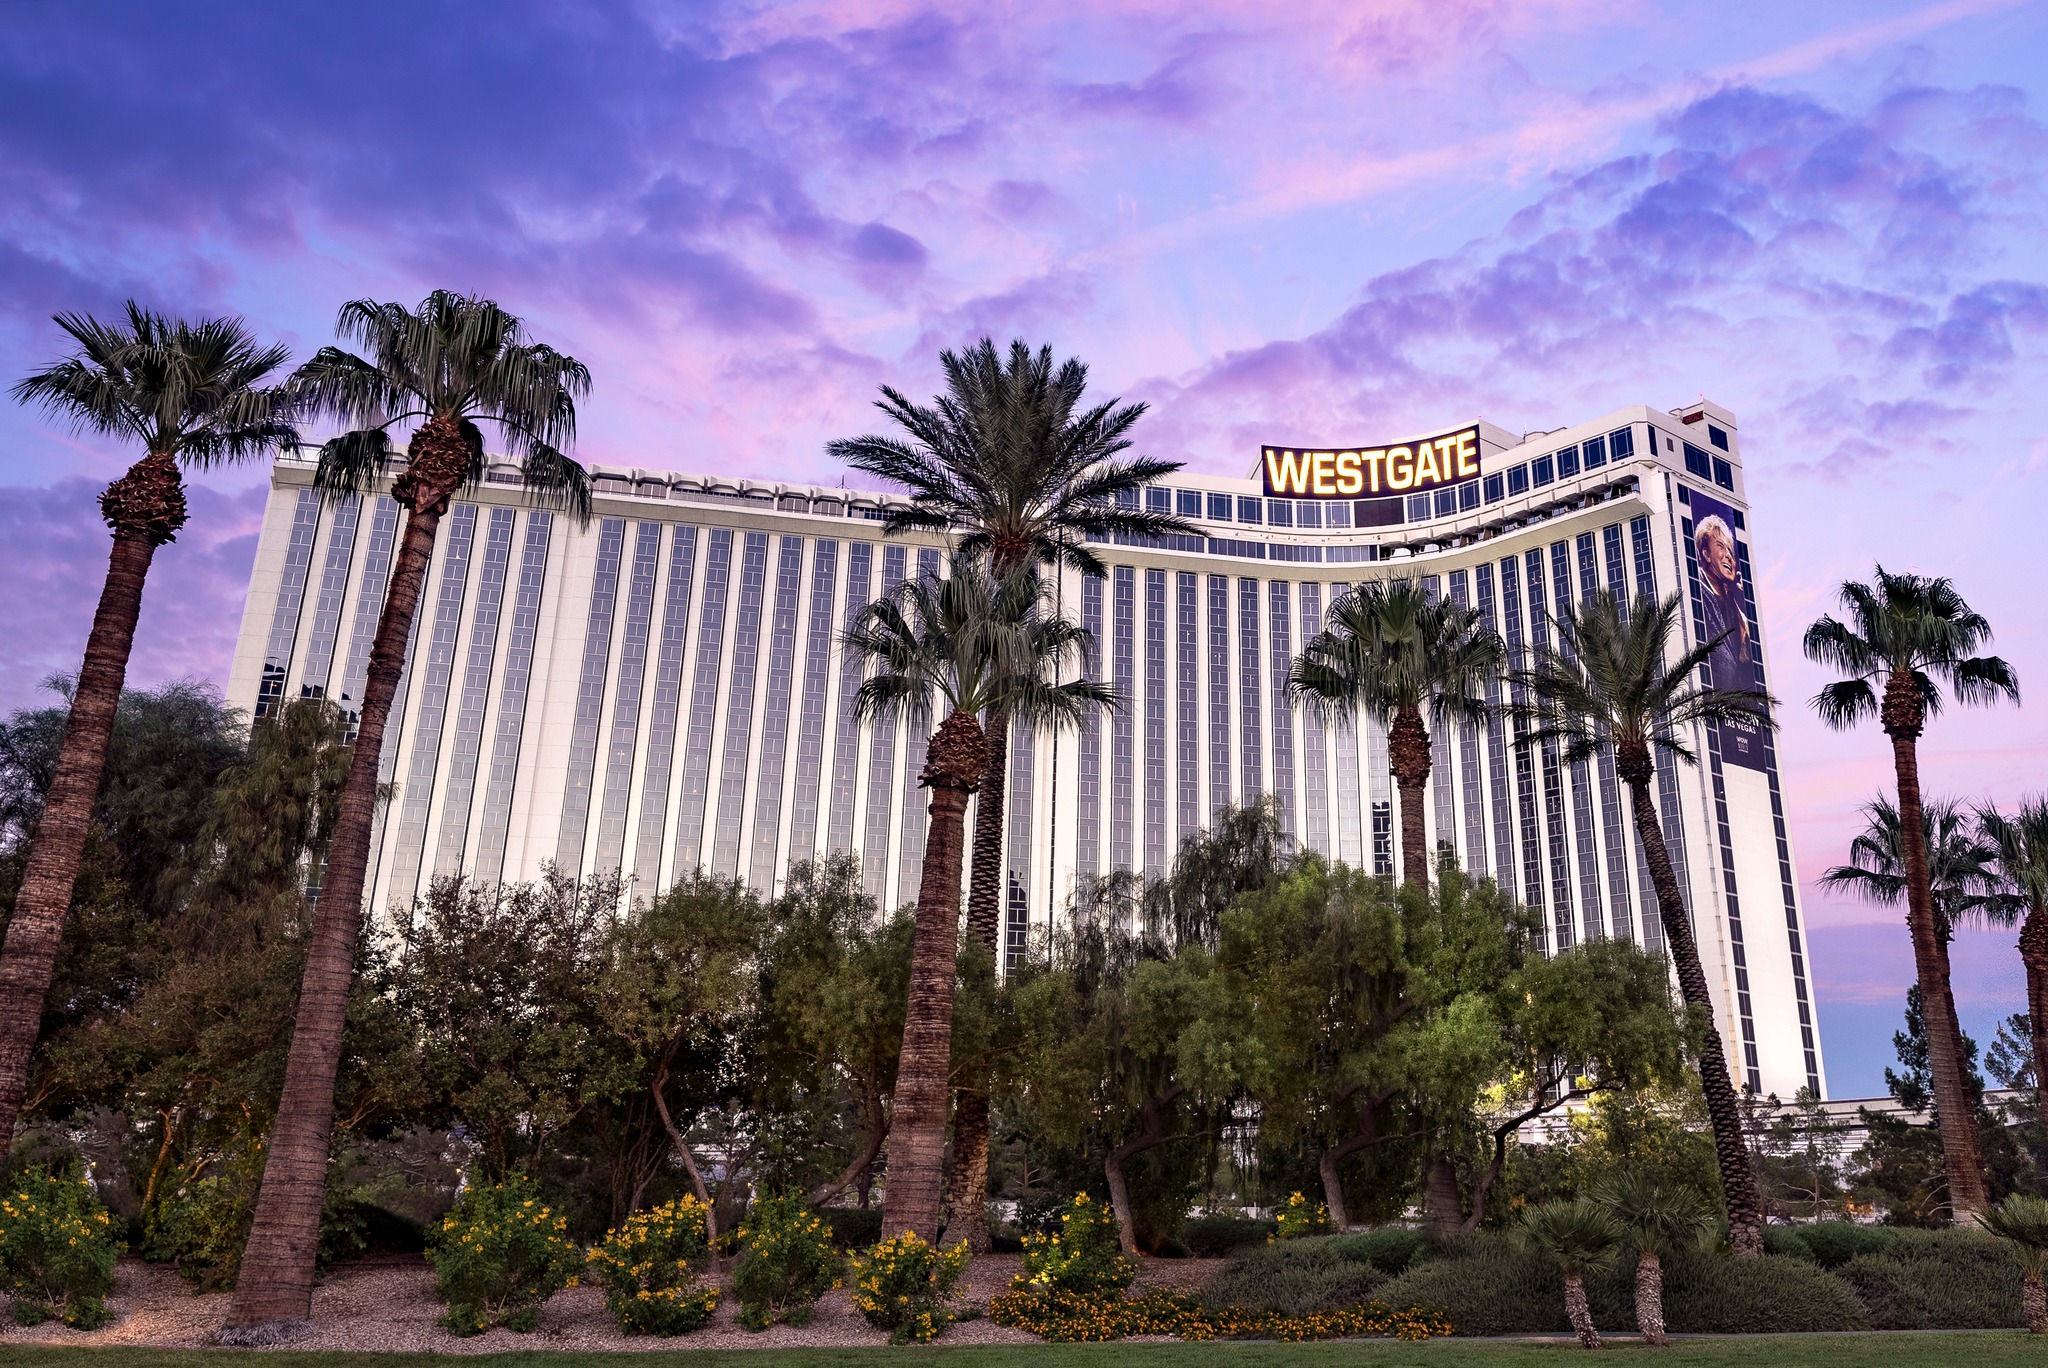 9 Best Hotels in Vegas for Design-Savvy Travelers